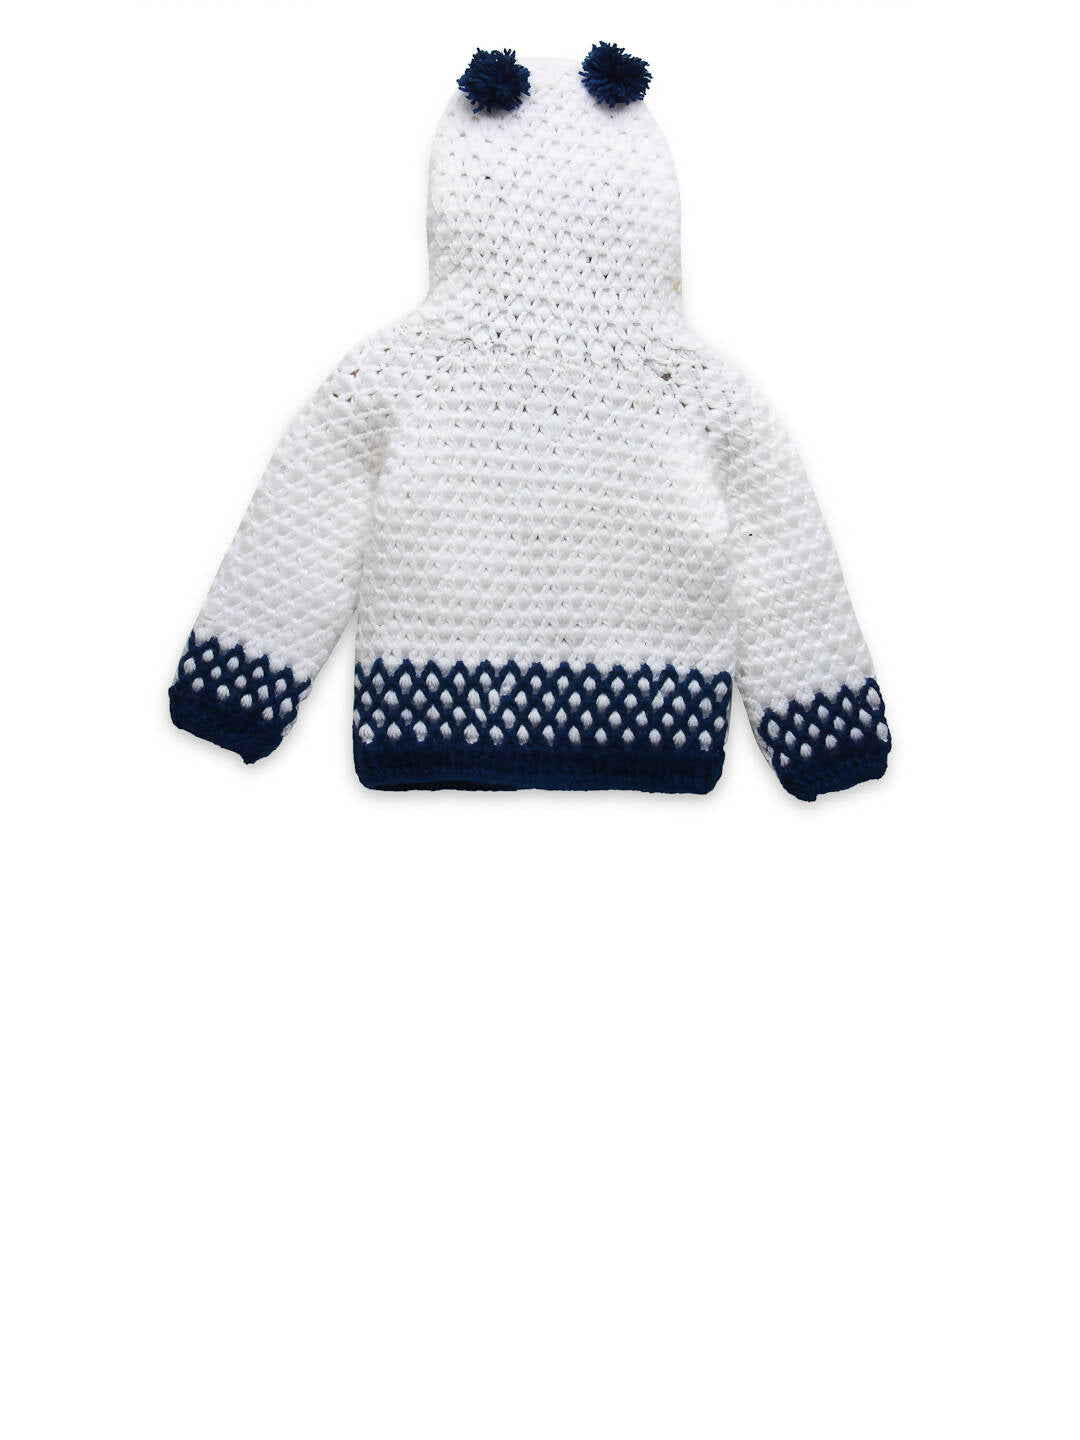 Chutput Kids Woollen Hand Knitted Tacky Design Sweater For Baby Boys - White - Distacart